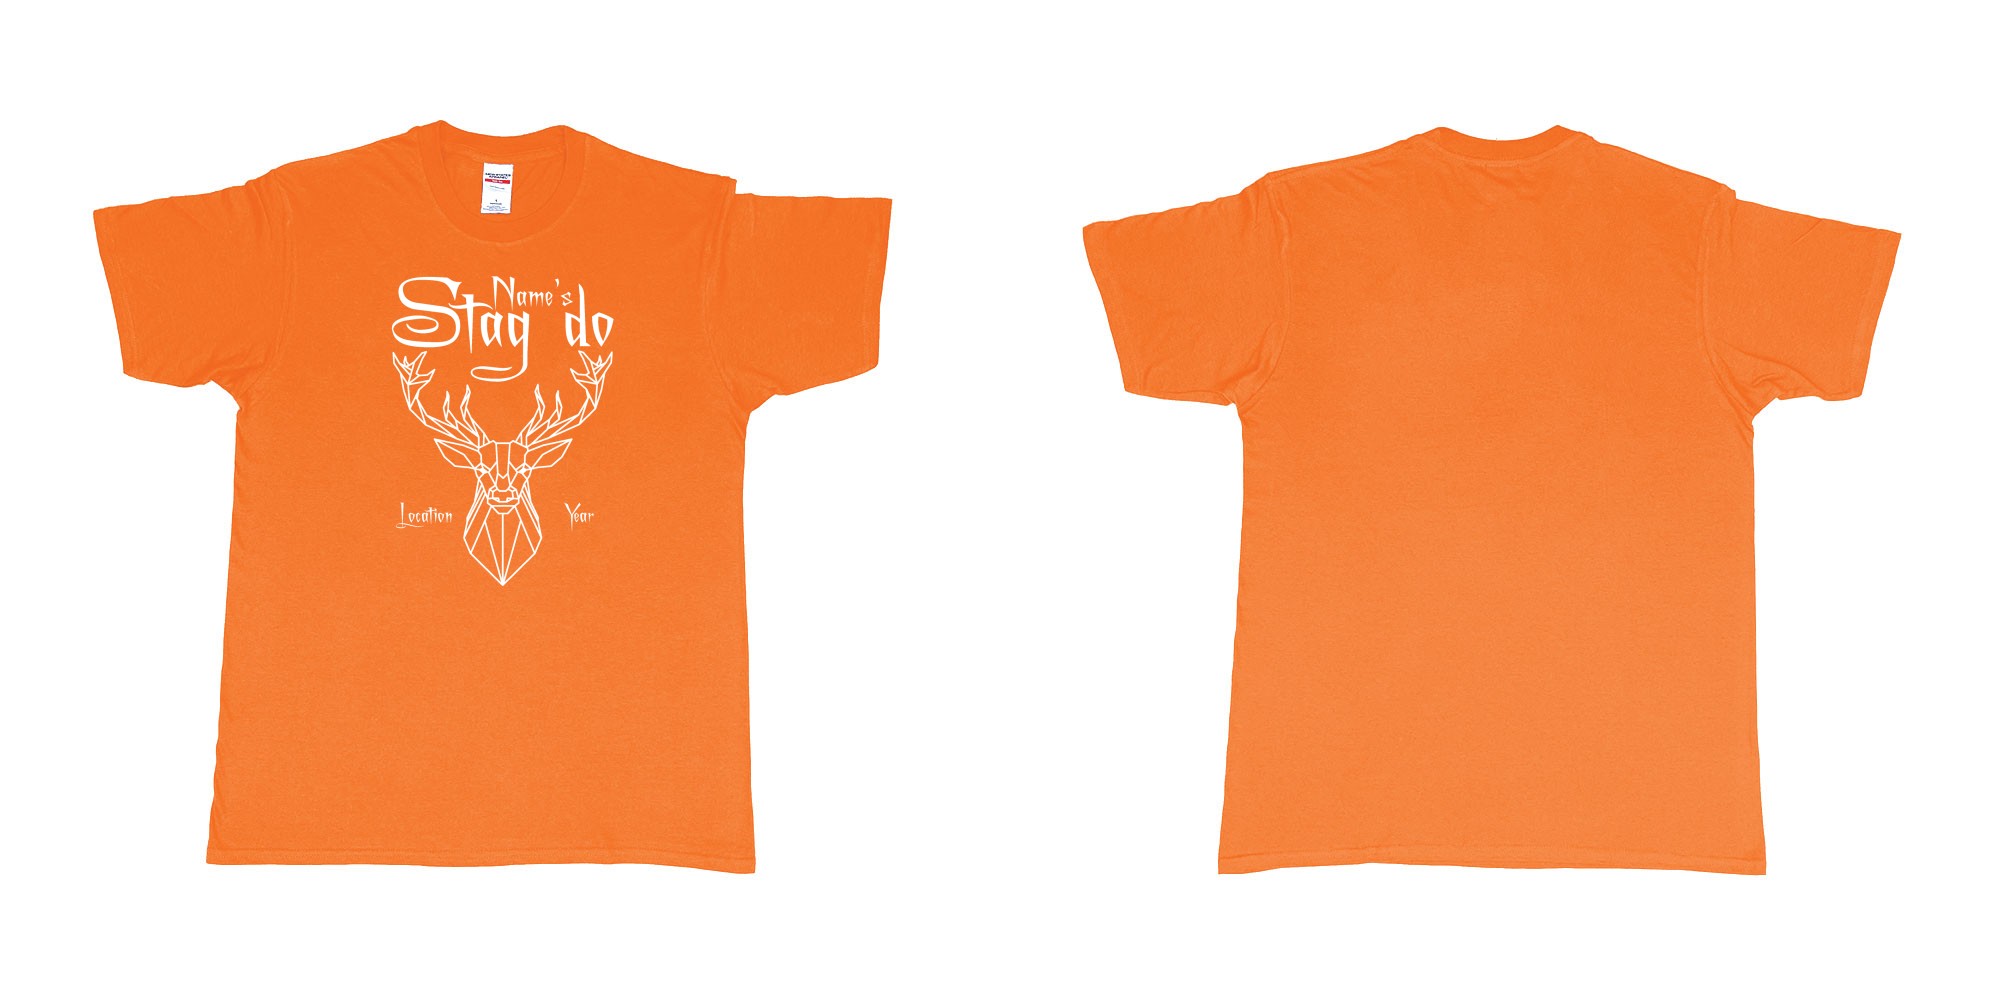 Custom tshirt design stag do design custom location year in fabric color orange choice your own text made in Bali by The Pirate Way